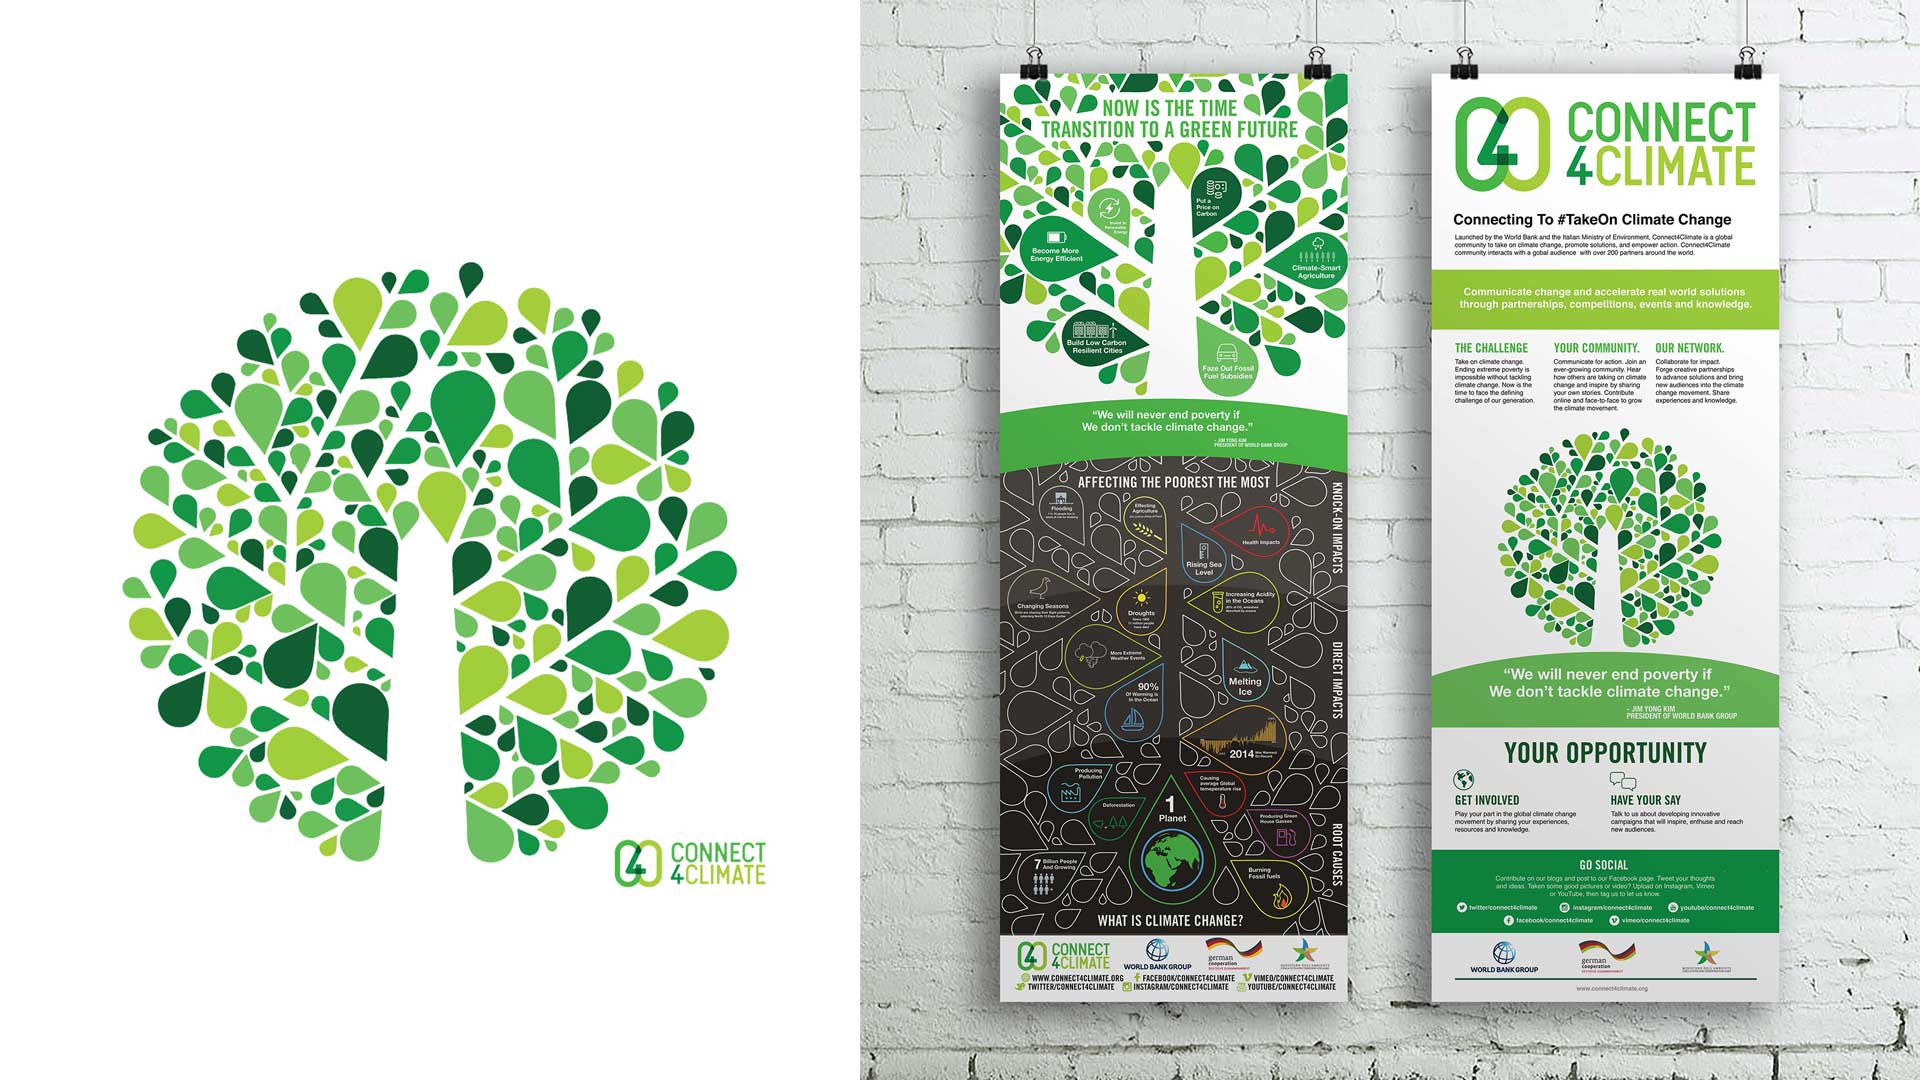 Maryam Allee Connect 4 Climate logo and branding with tree logo